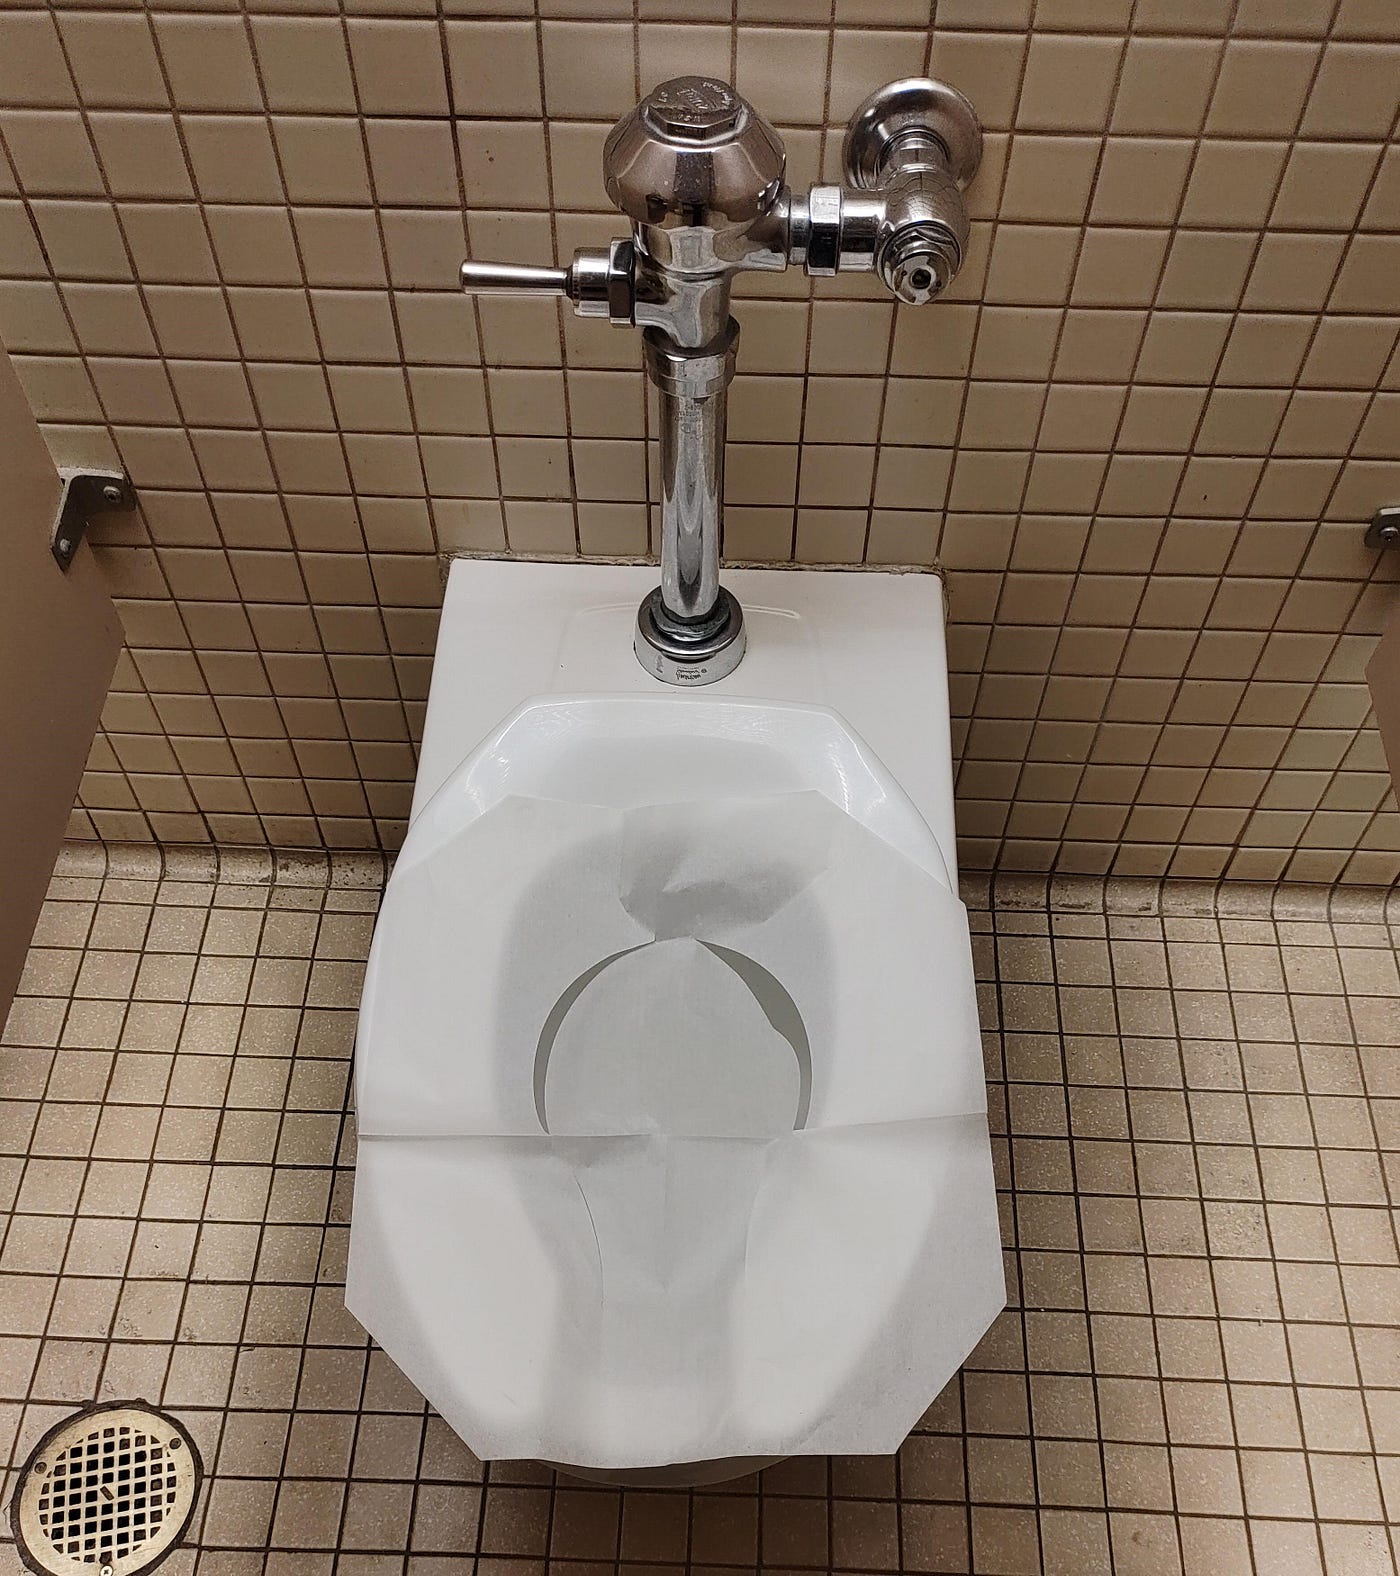 What happens when you don't use a toilet seat cover?